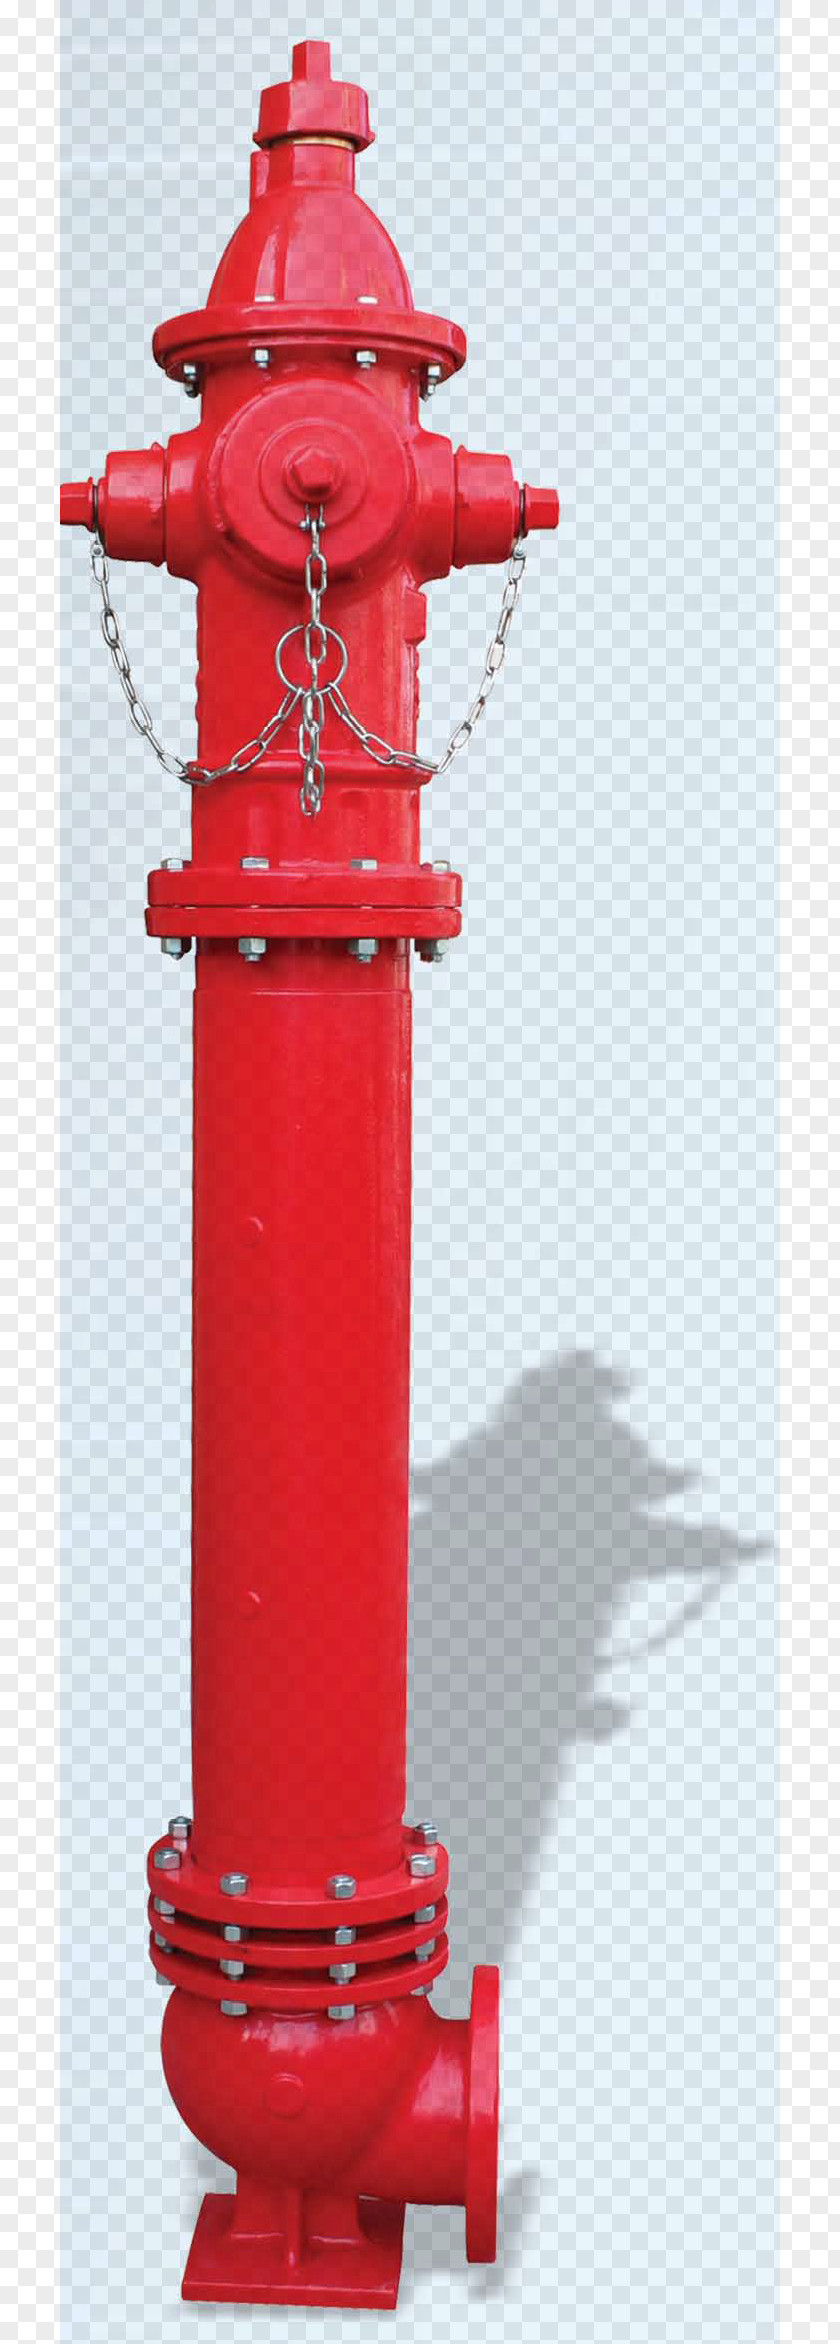 Fire Hydrant Conflagration Protection Valve PNG